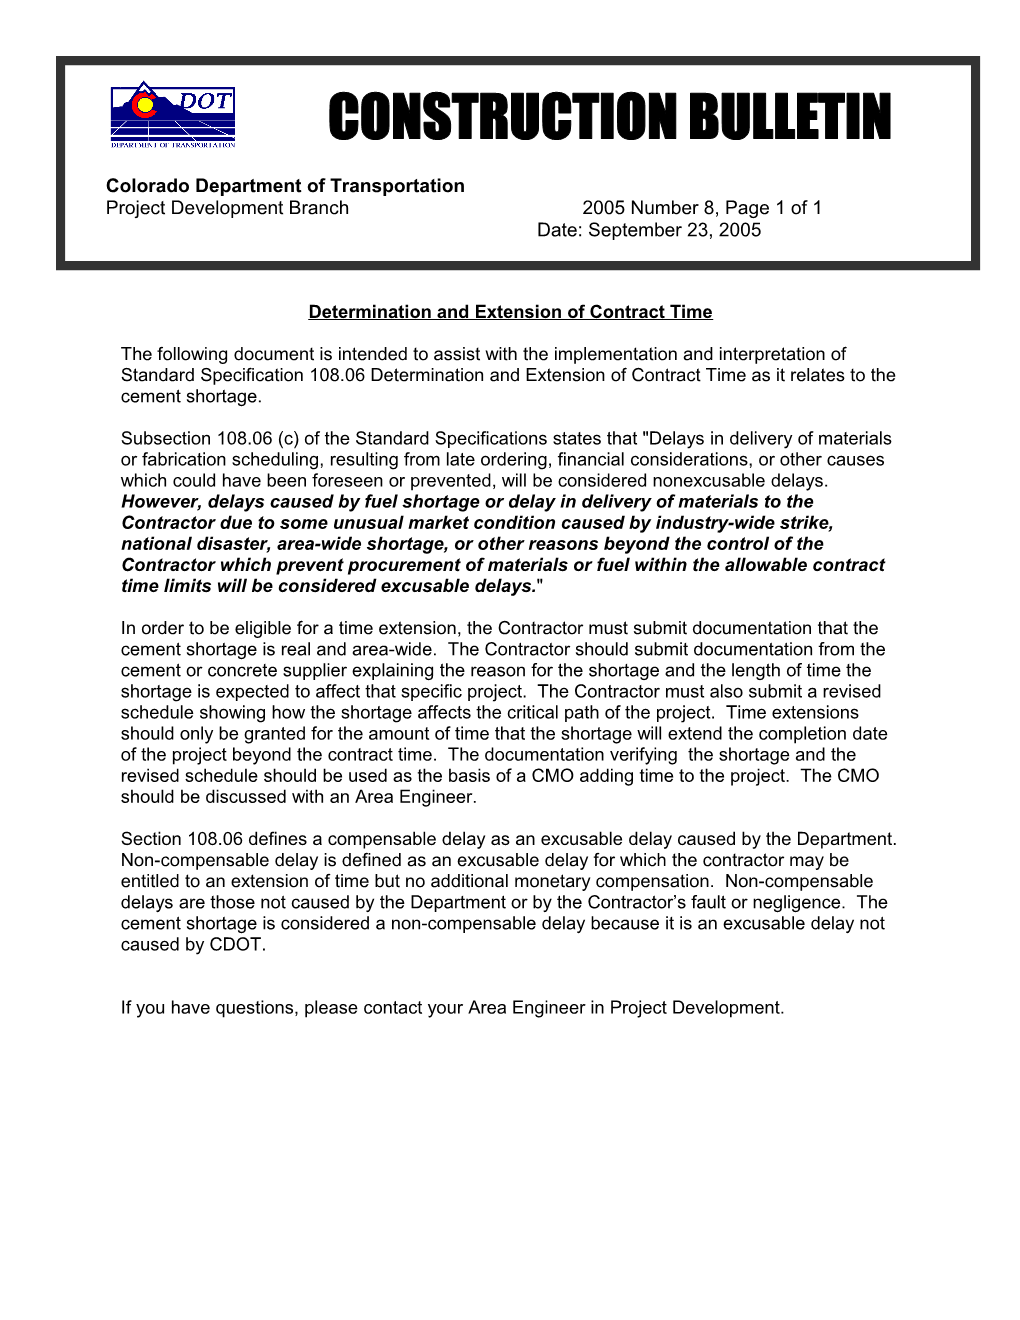 Project Development Branch 2005 Number 8, Page 1 of 1